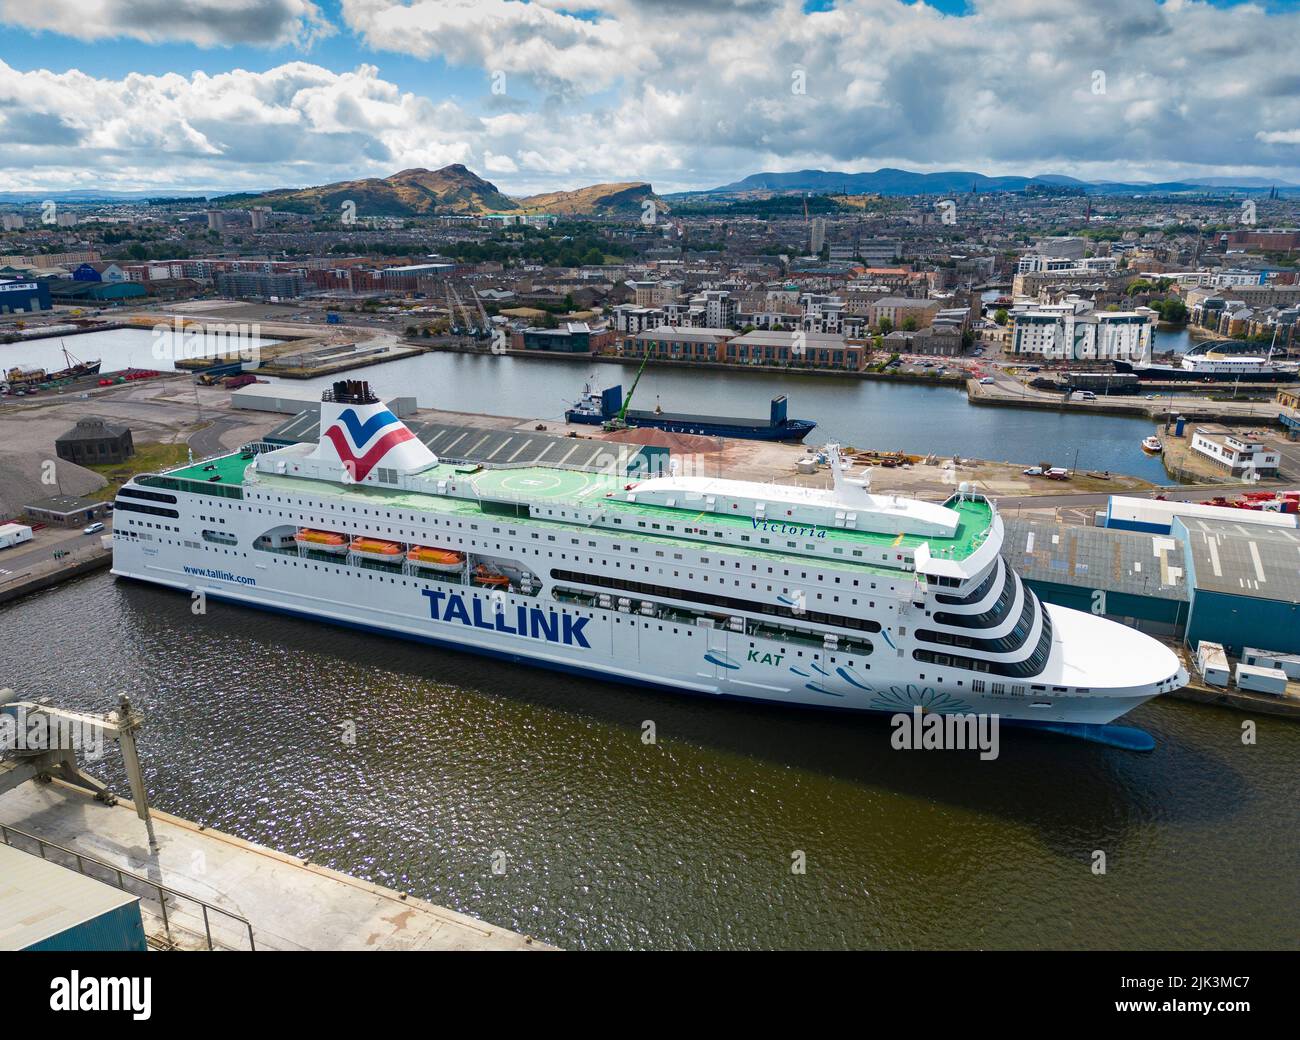 Leith, Scotland, UK. 30th July 2022. View of the Estonian ferry MS Victoria berthed at a dock in Leith, Edinburgh. The ferry has been acquired to temporarily house Ukrainian refugees who have arrived in Scotland. The first refugees have already moved into cabins on board. Iain Masterton/Alamy Live News Stock Photo